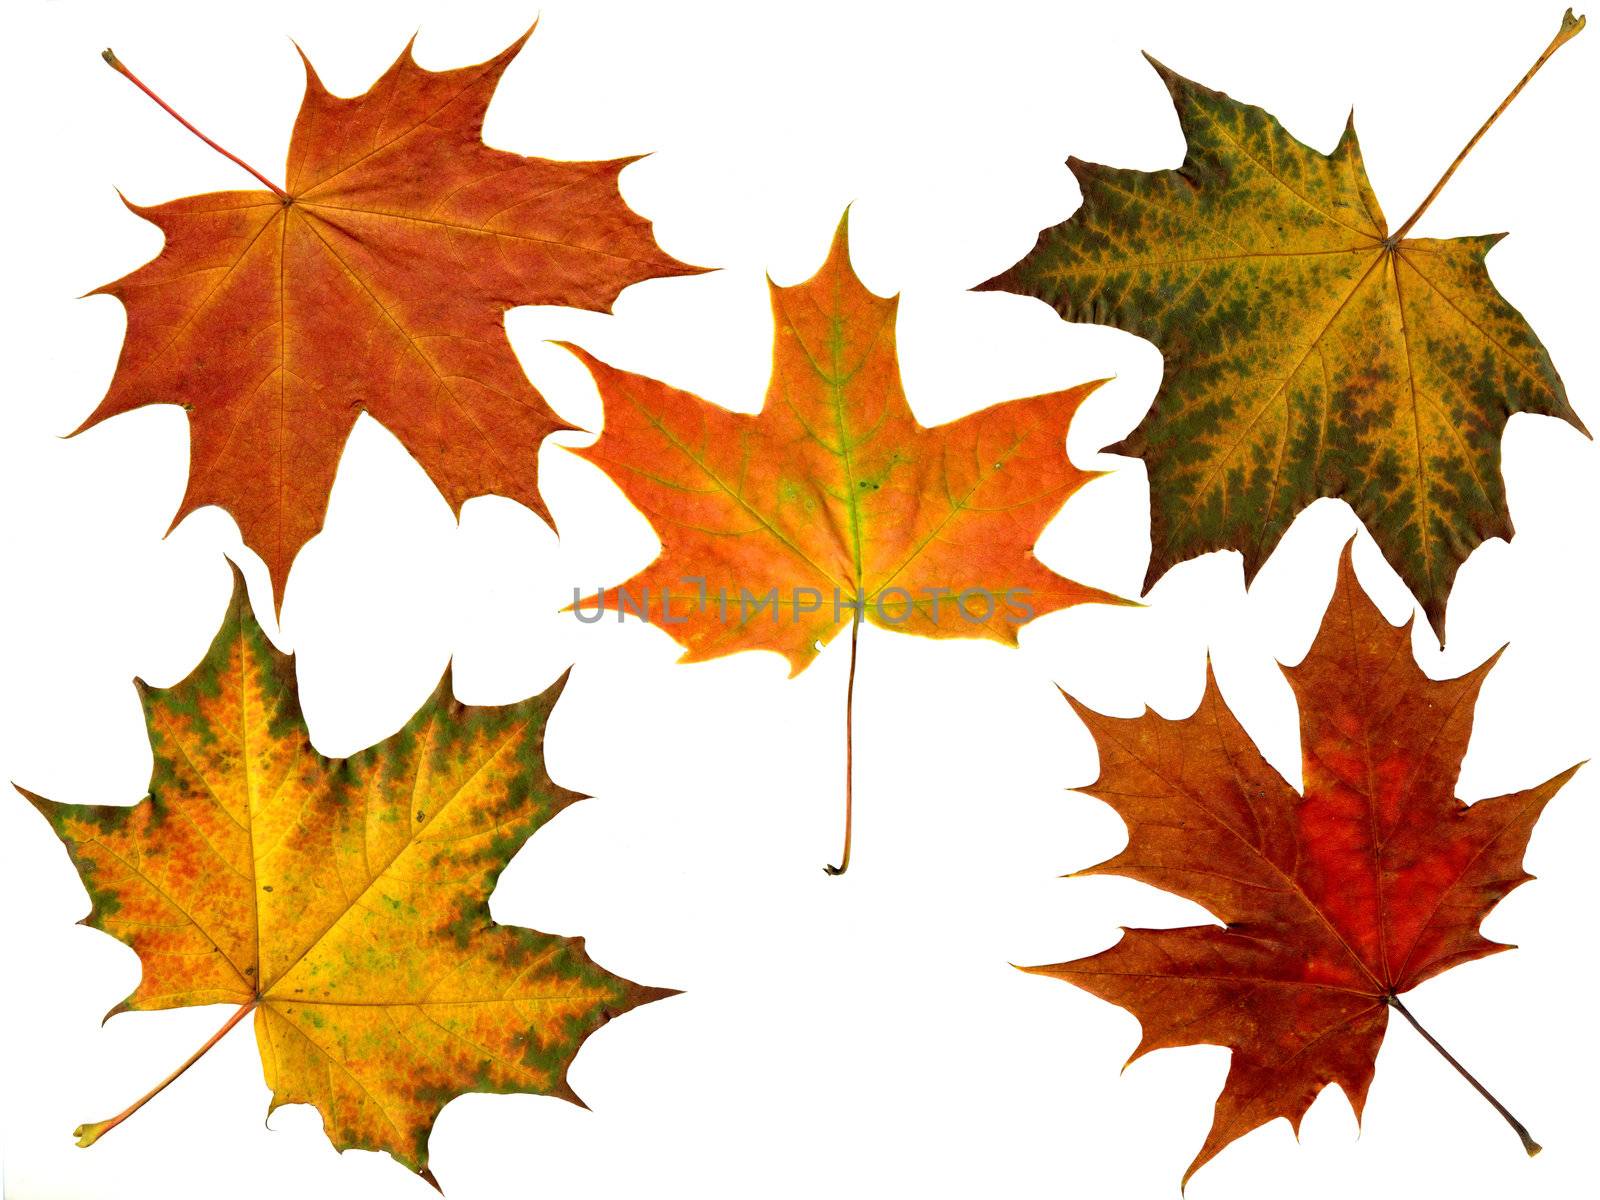 5 different autumn leaves from a maple